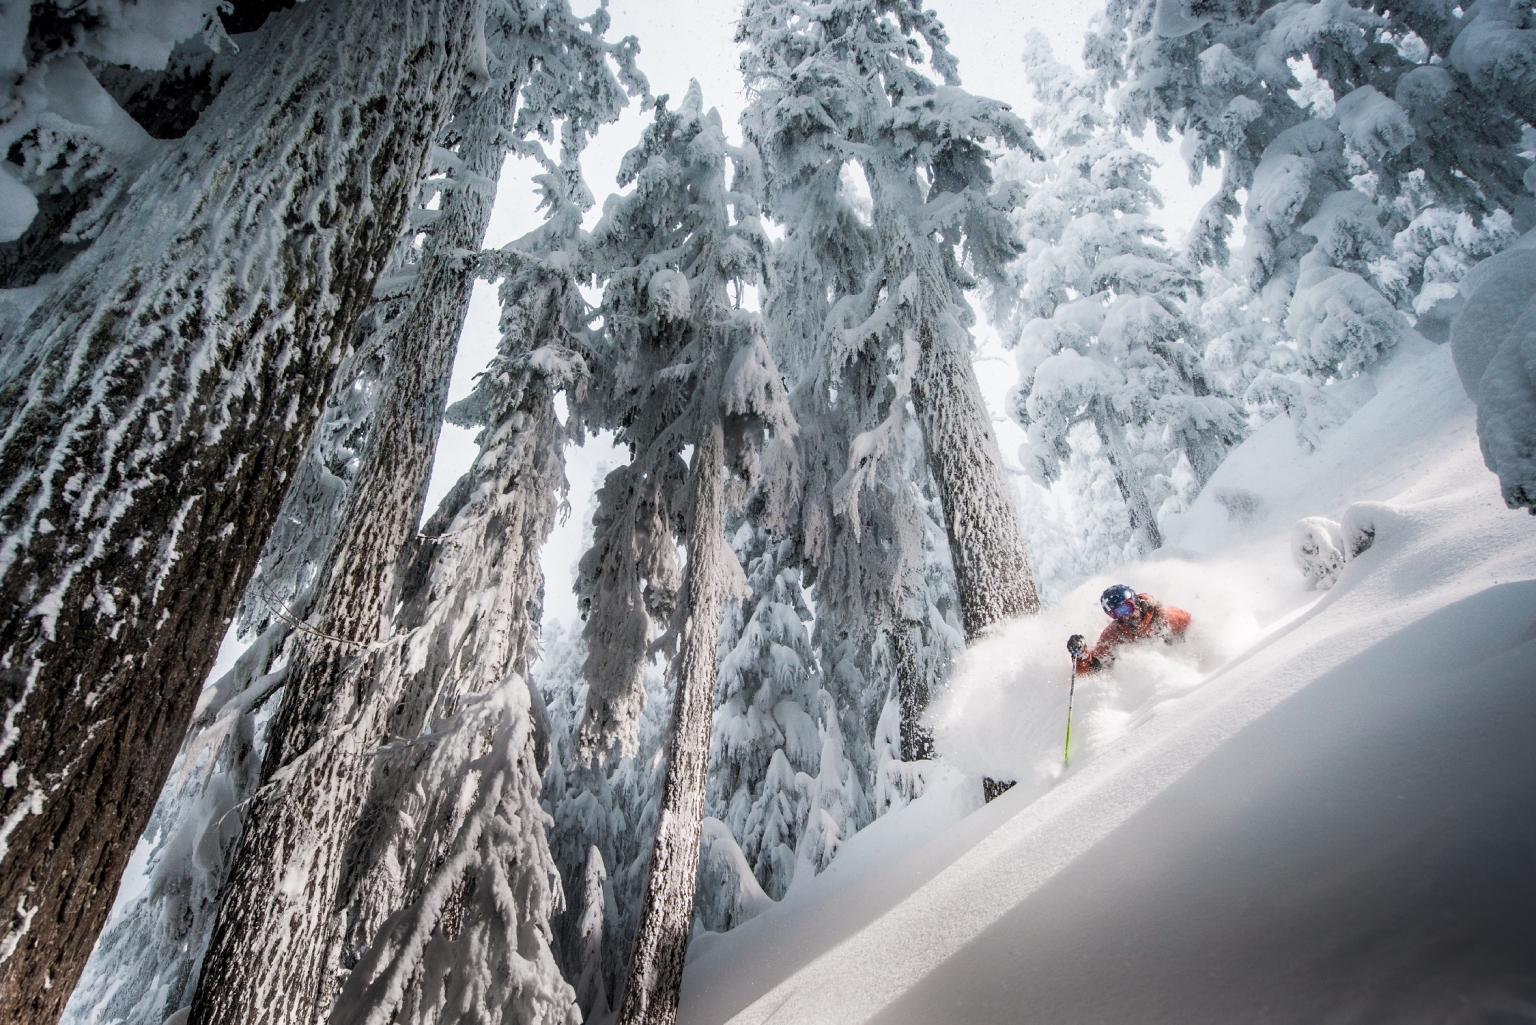 One skier turns through deep snow in the trees